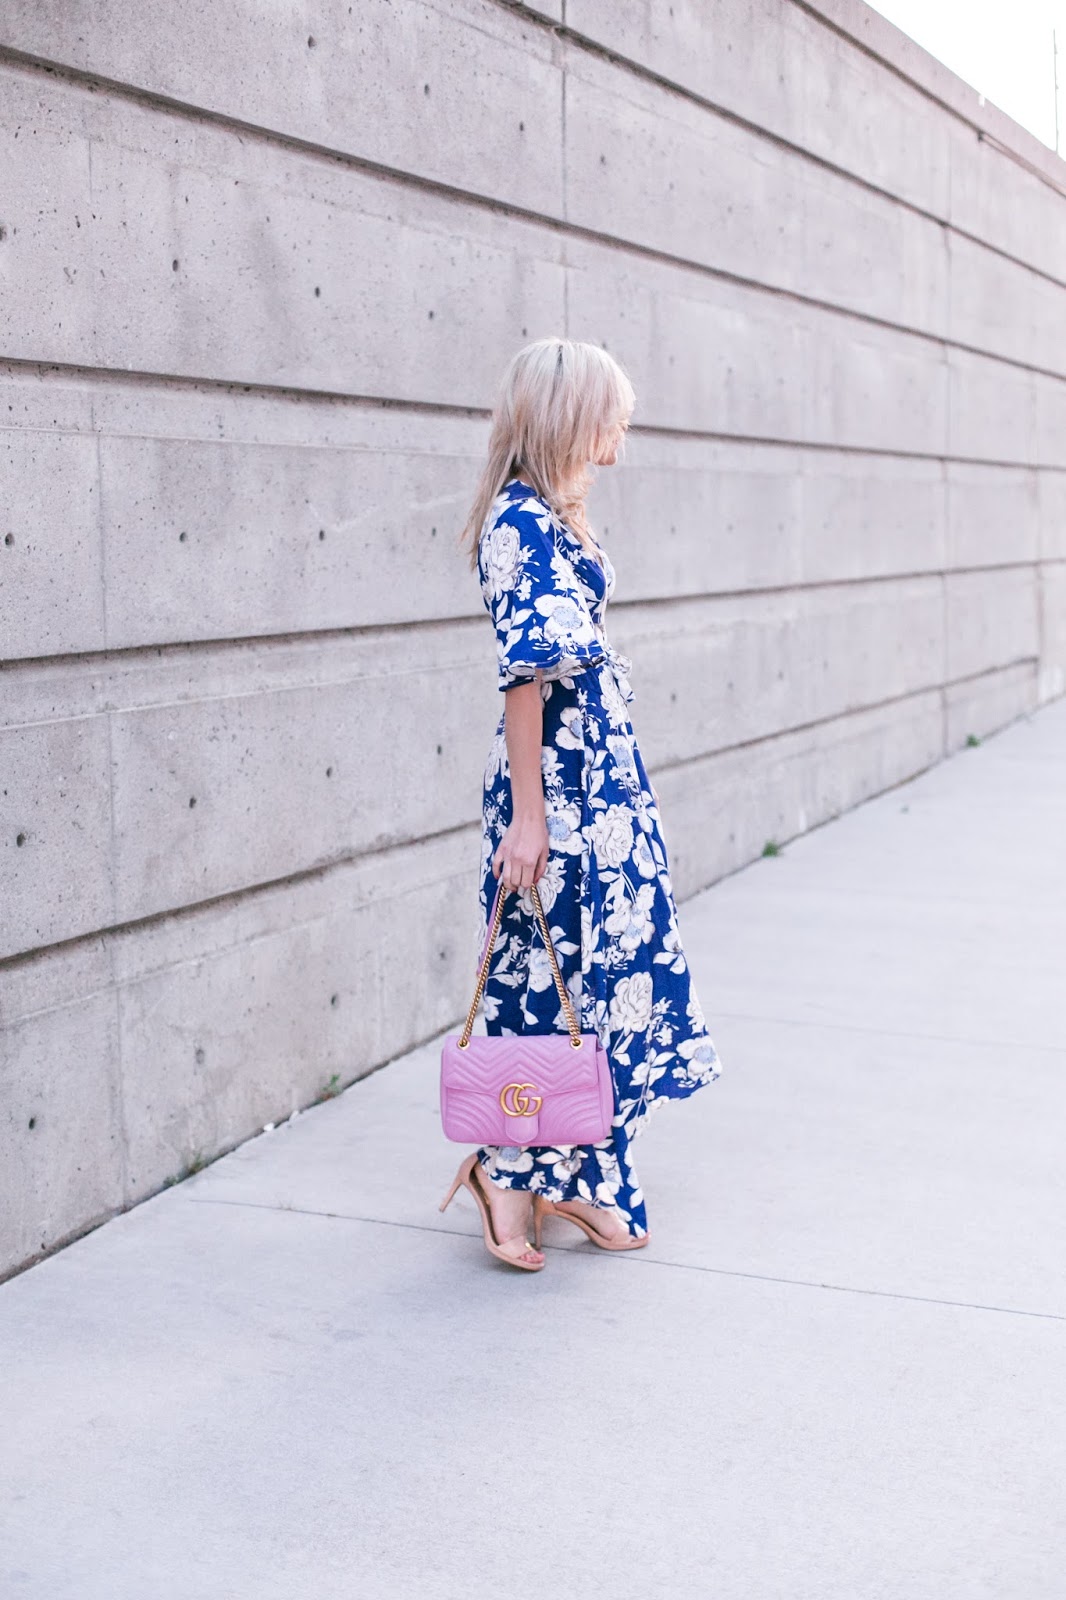 Bijuleni - This floral dress is only $18 plus 7 Easy Ways To Transition Your Summer style to Fall - Floral print maxi dress, Gucci Marmont Matelasse handbag and nude strap heel sandals ootd